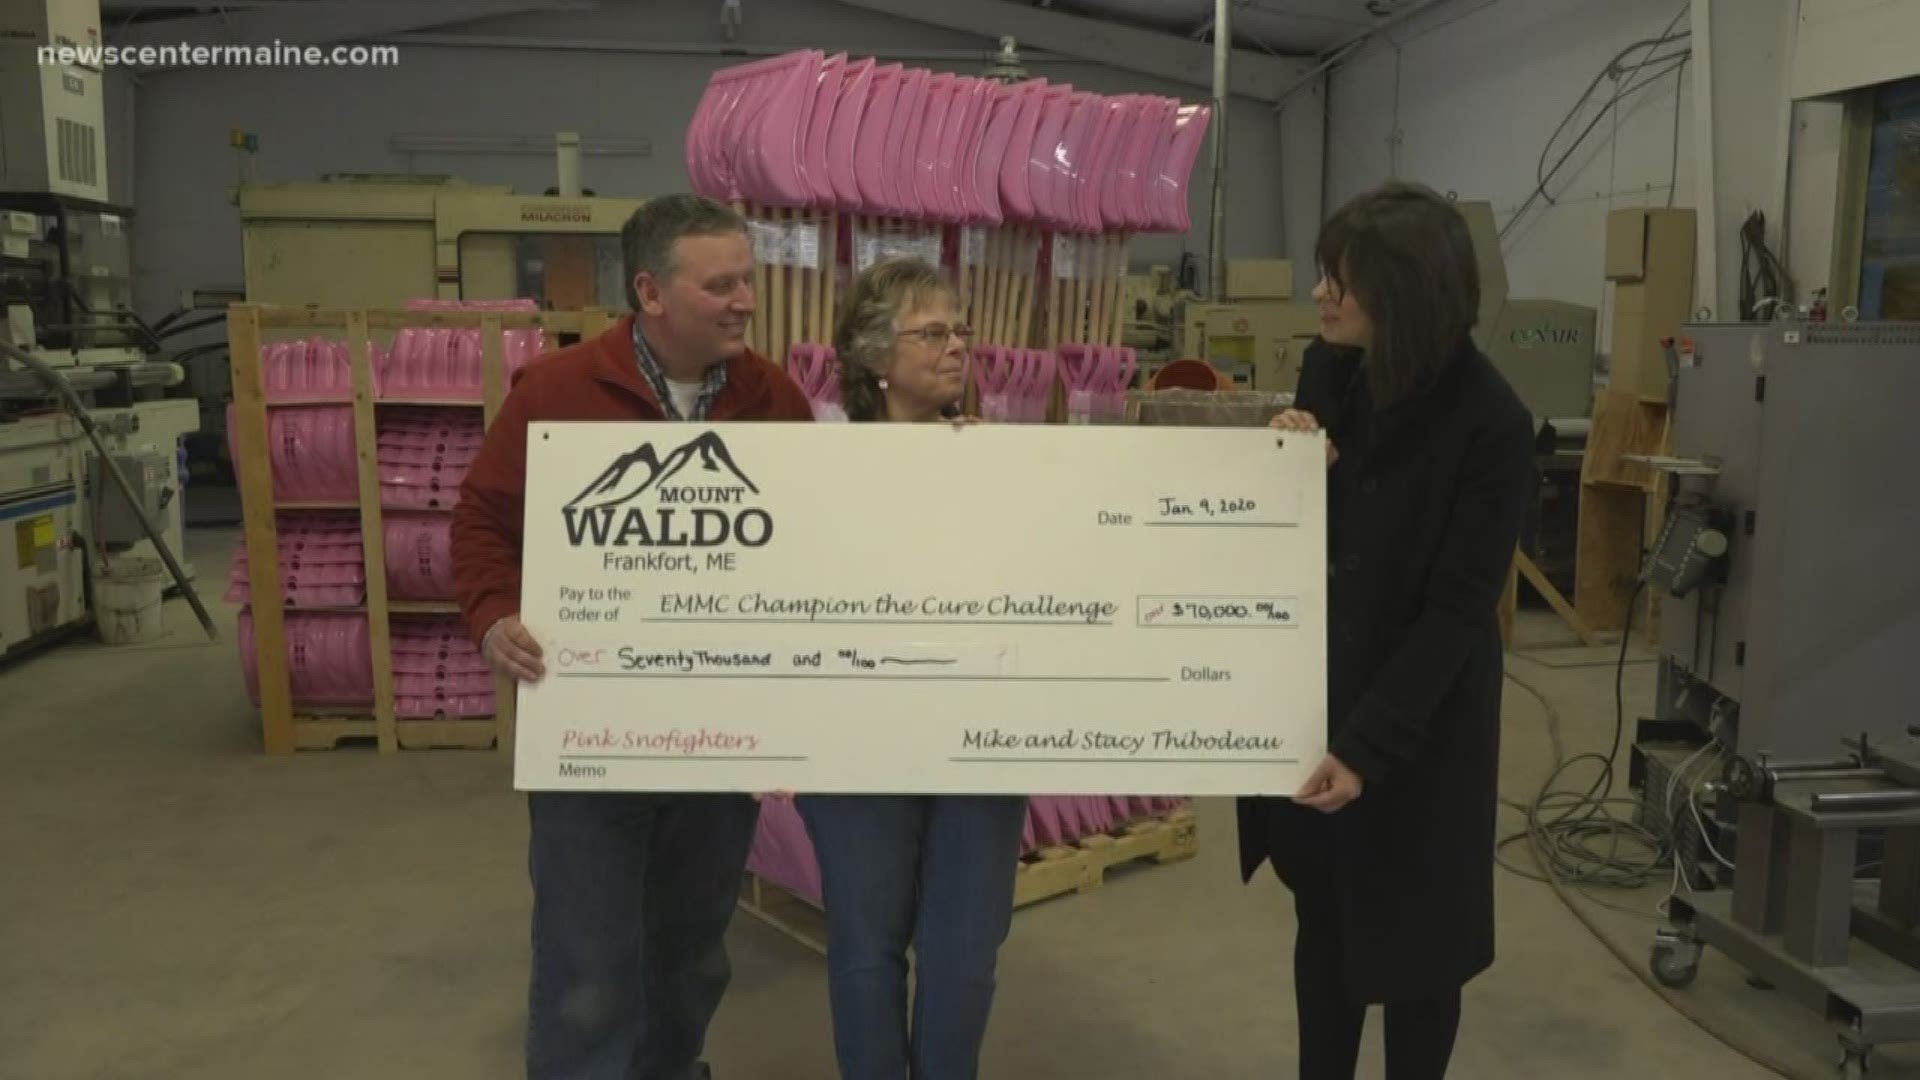 Mount Waldo Plastics in Frankfort has raised money than $70,000 for Champion to Cure cancer research by selling pink snow shovels.